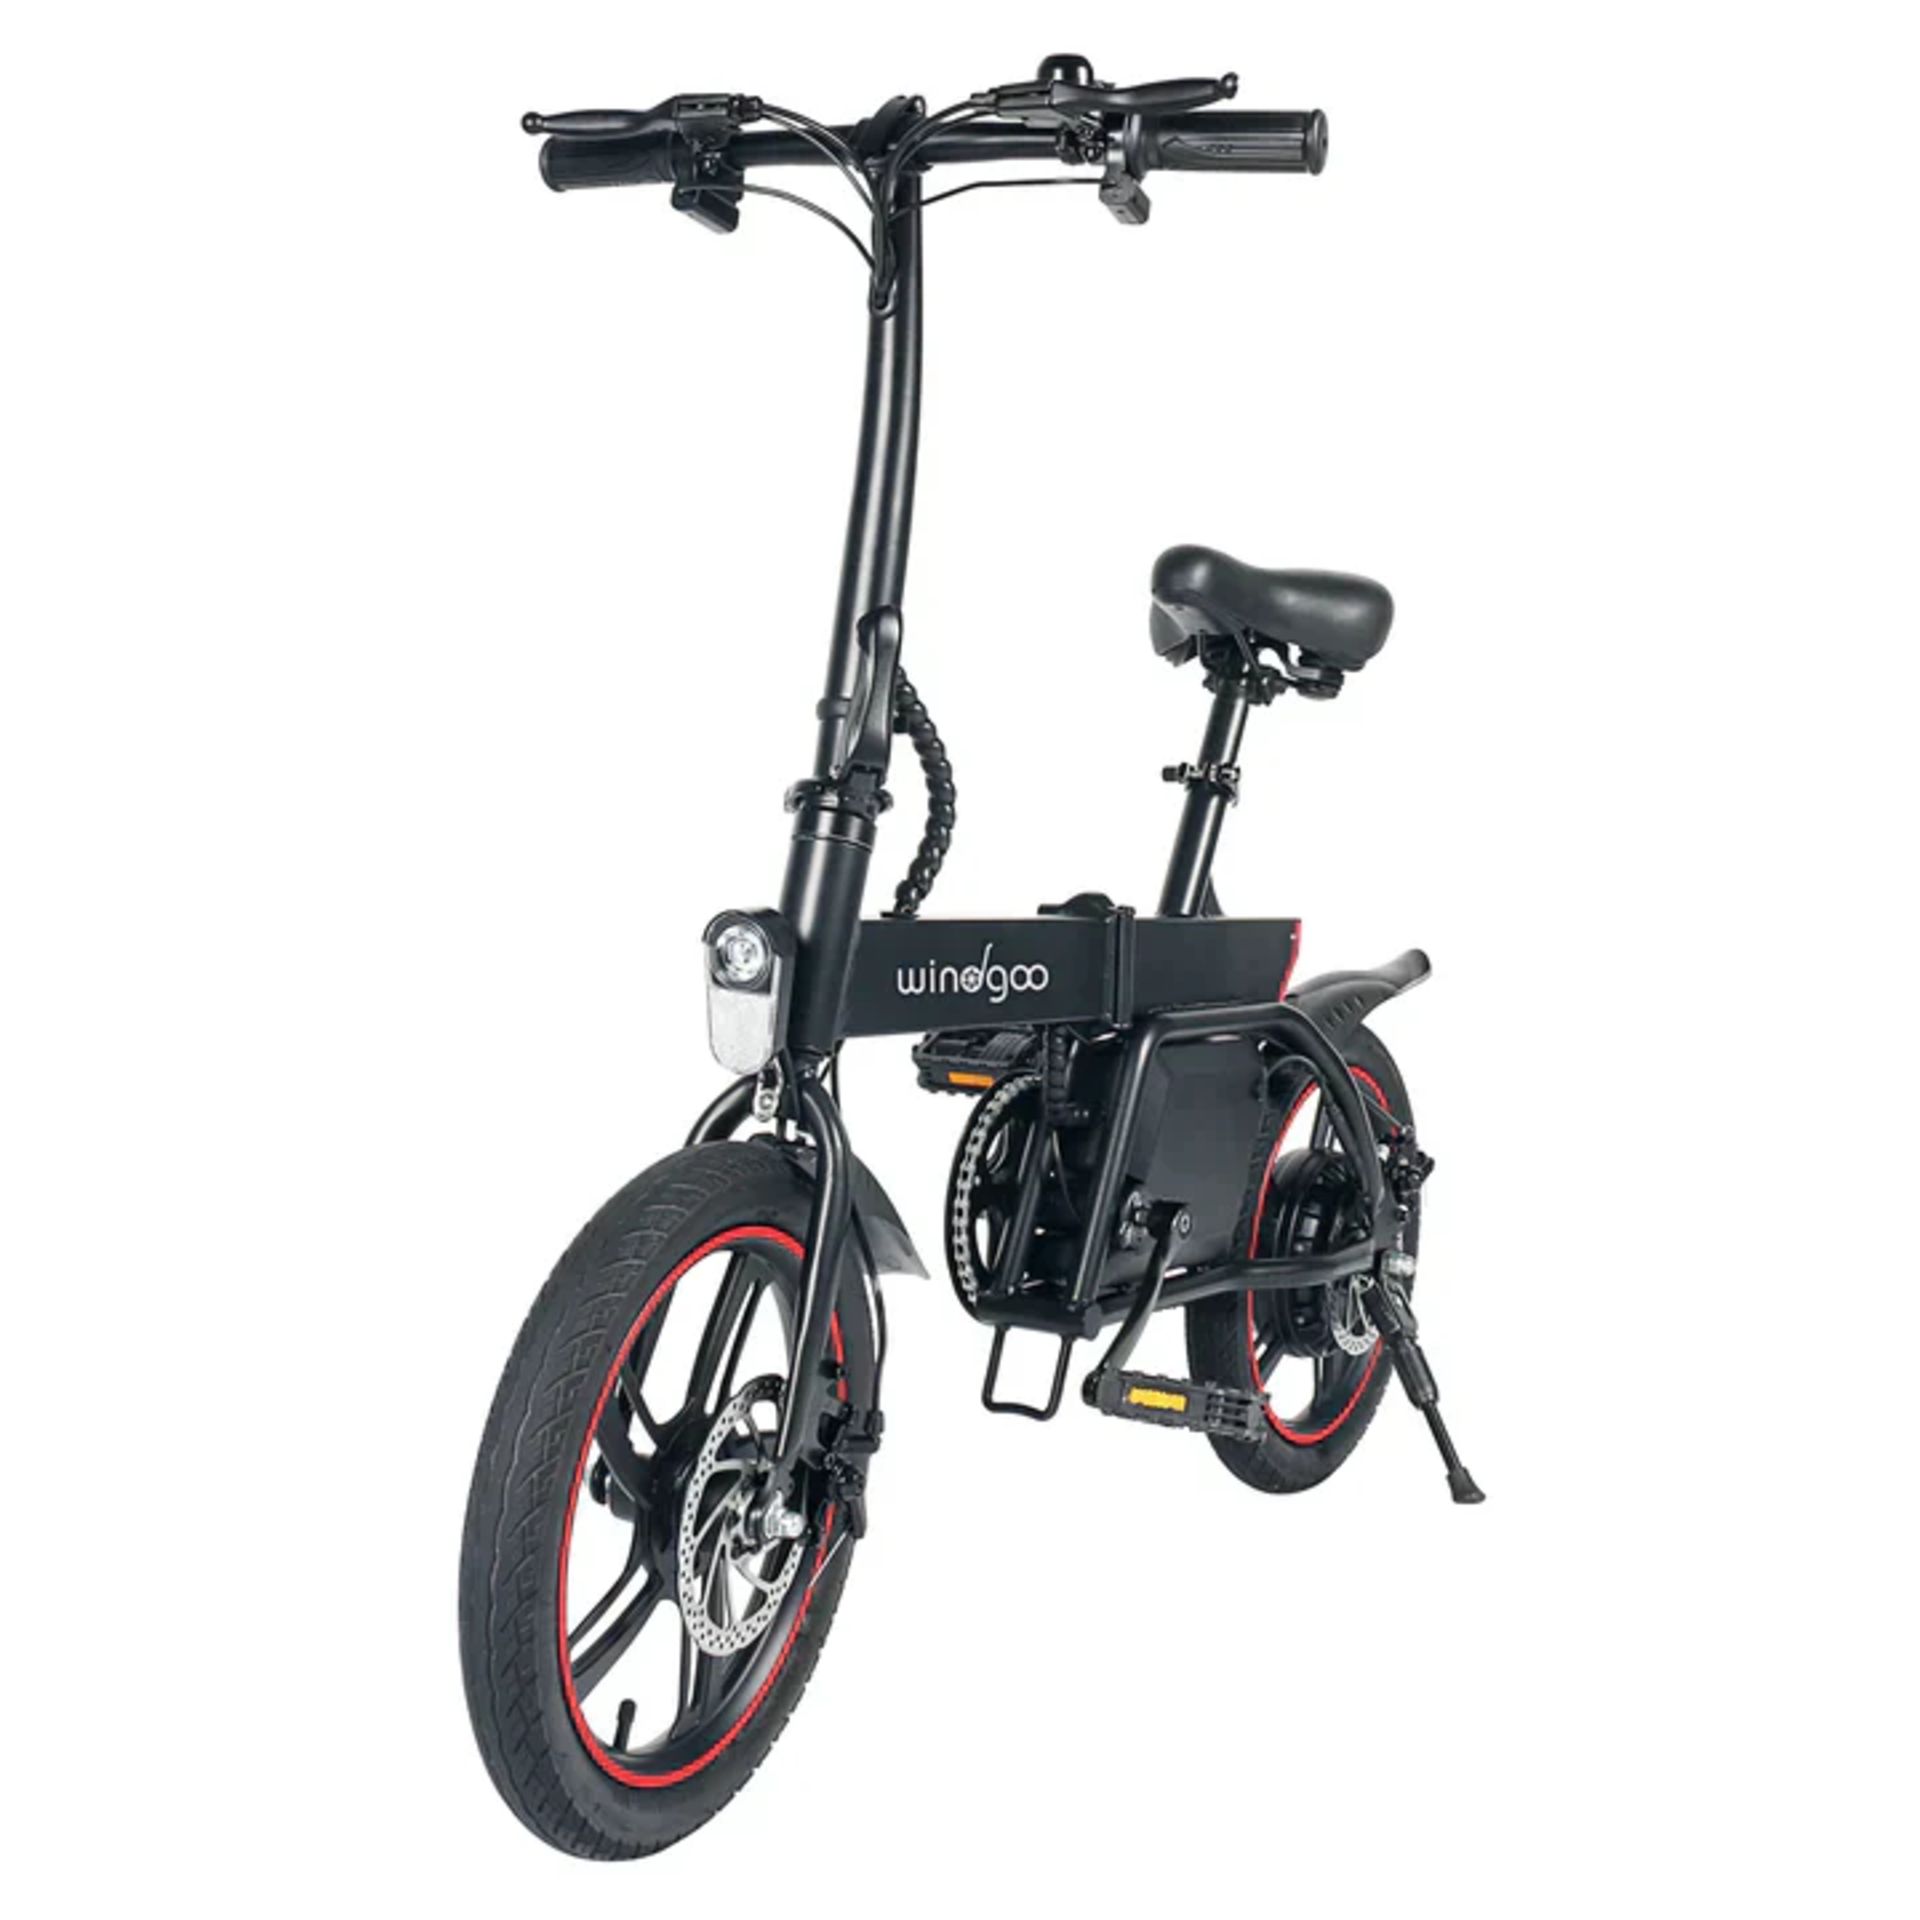 Windgoo B20 Pro Electric Bike. RRP £1,100.99. With 16-inch-wide tires and a frame of upgraded - Image 6 of 7